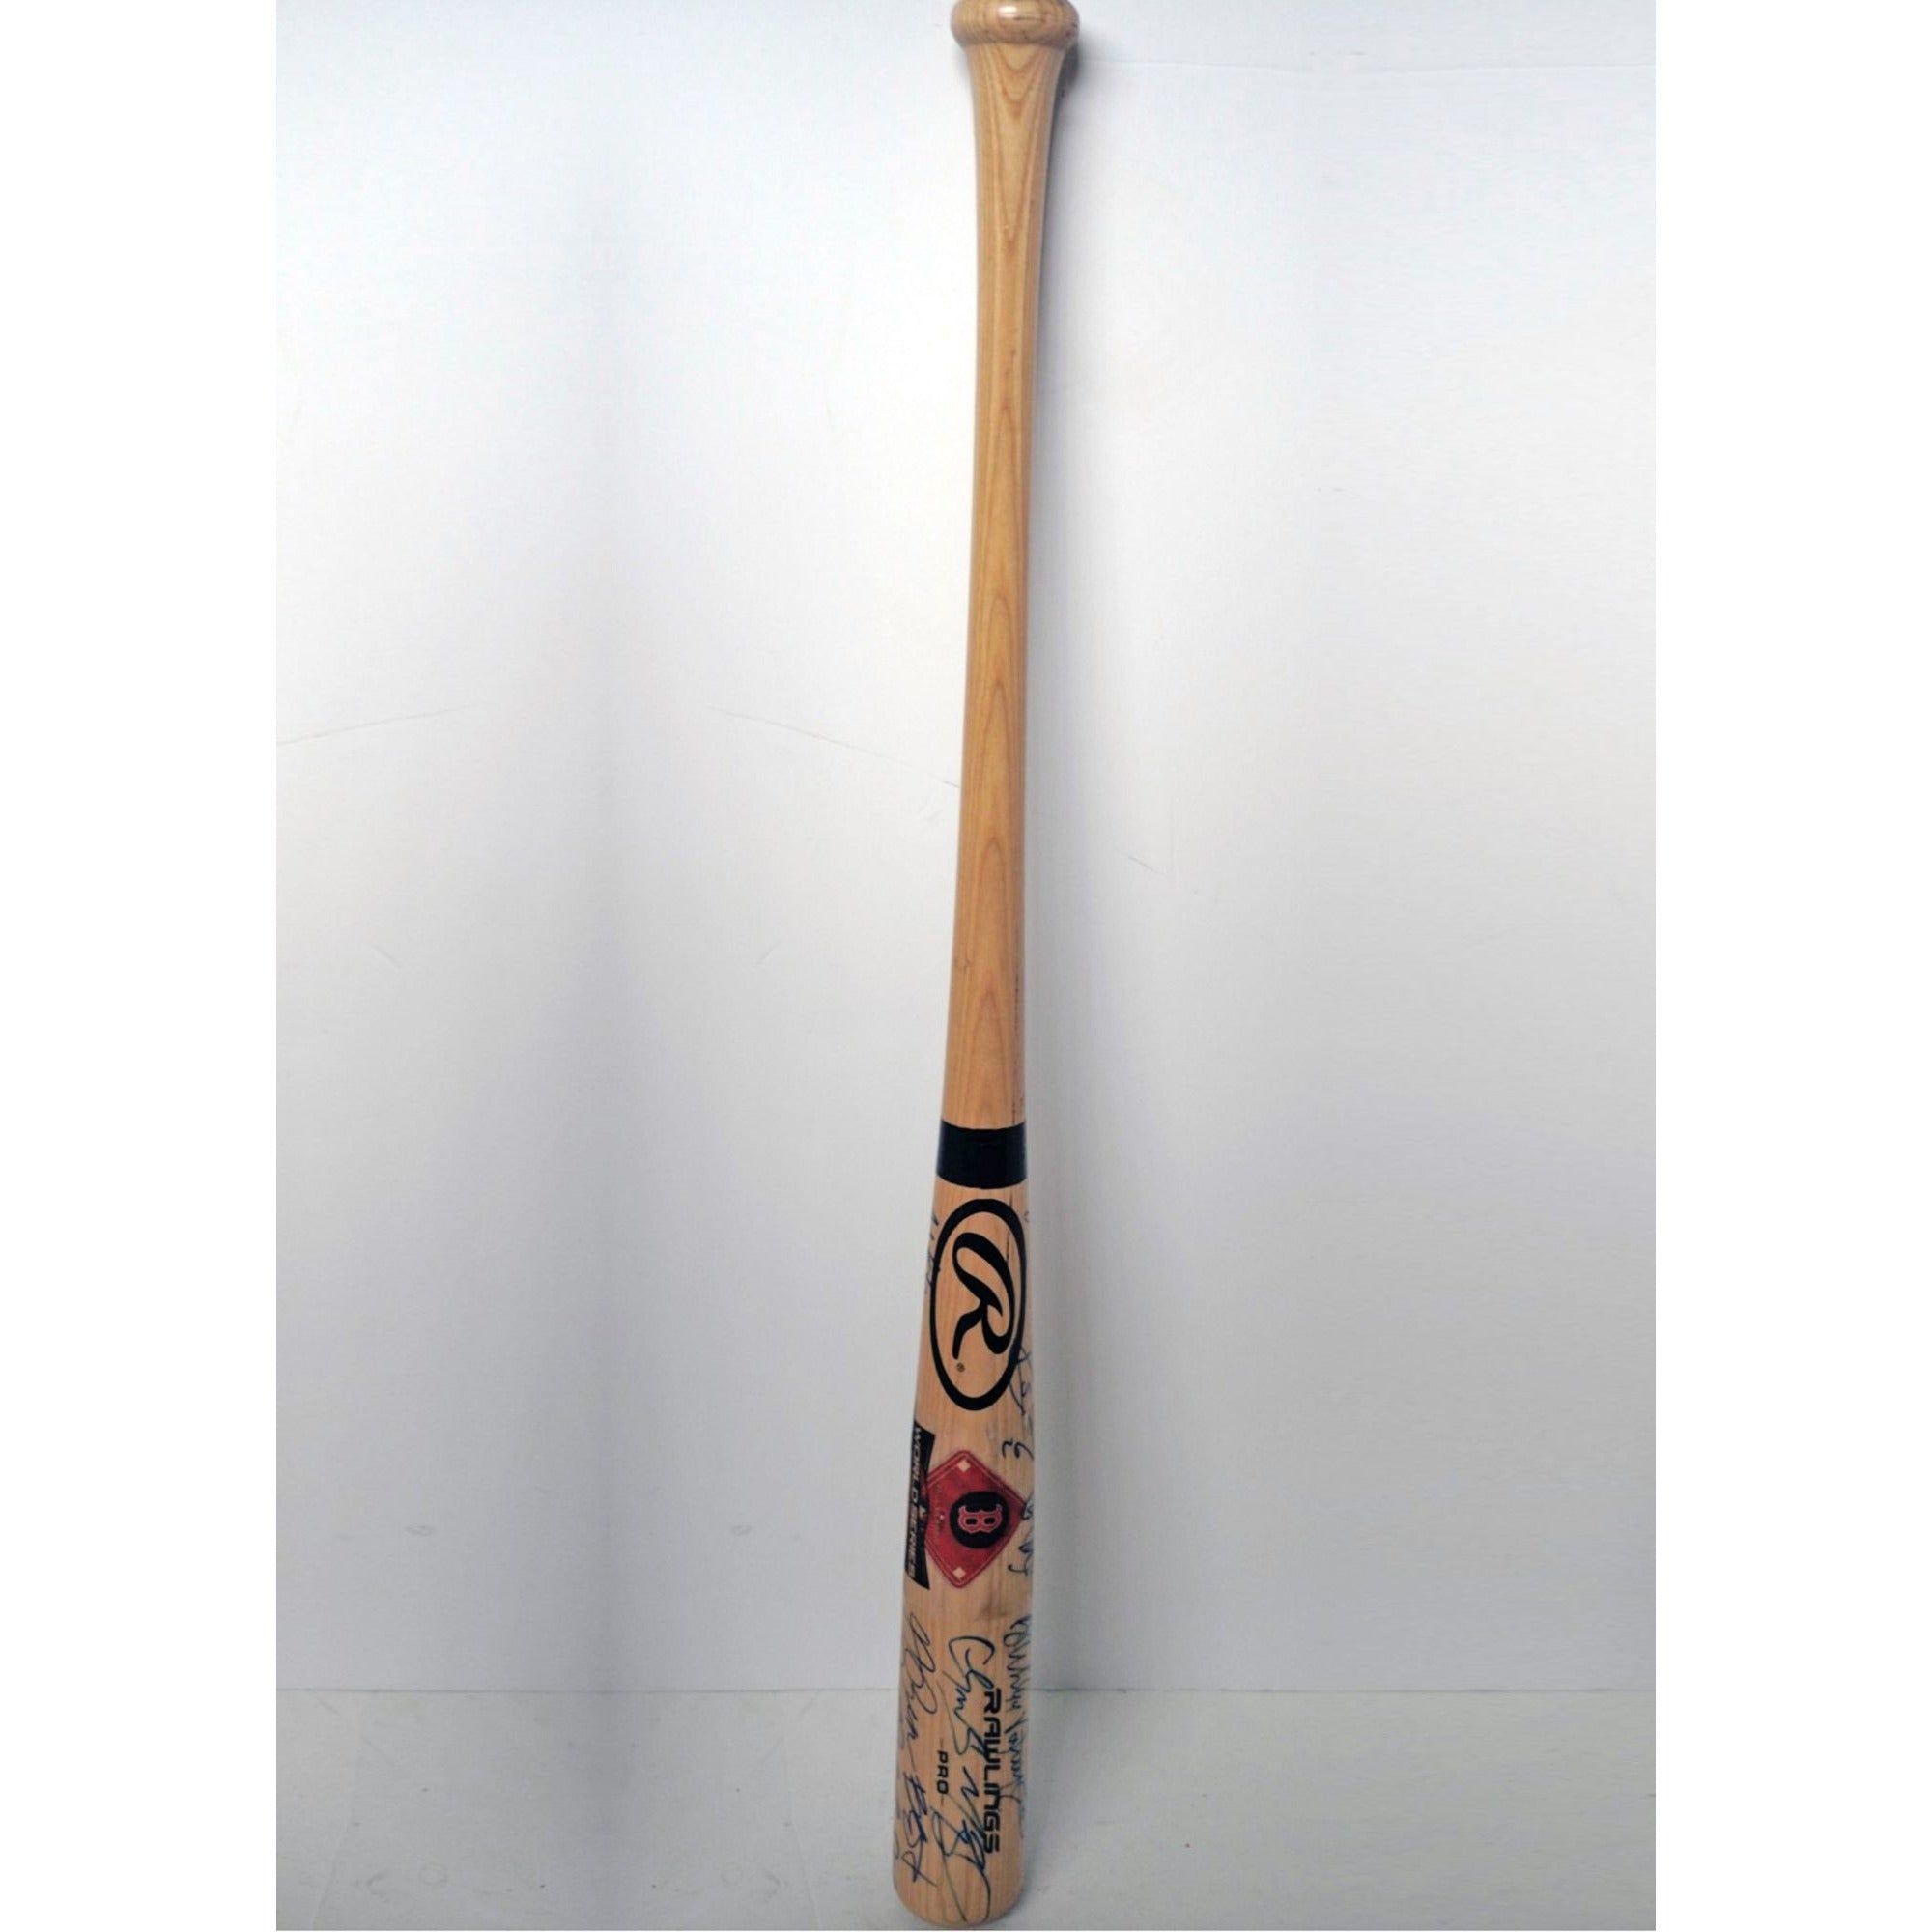 Mookie Betts, Xander Bogaerts, Boston Red Sox World Champions team signed bat with proof